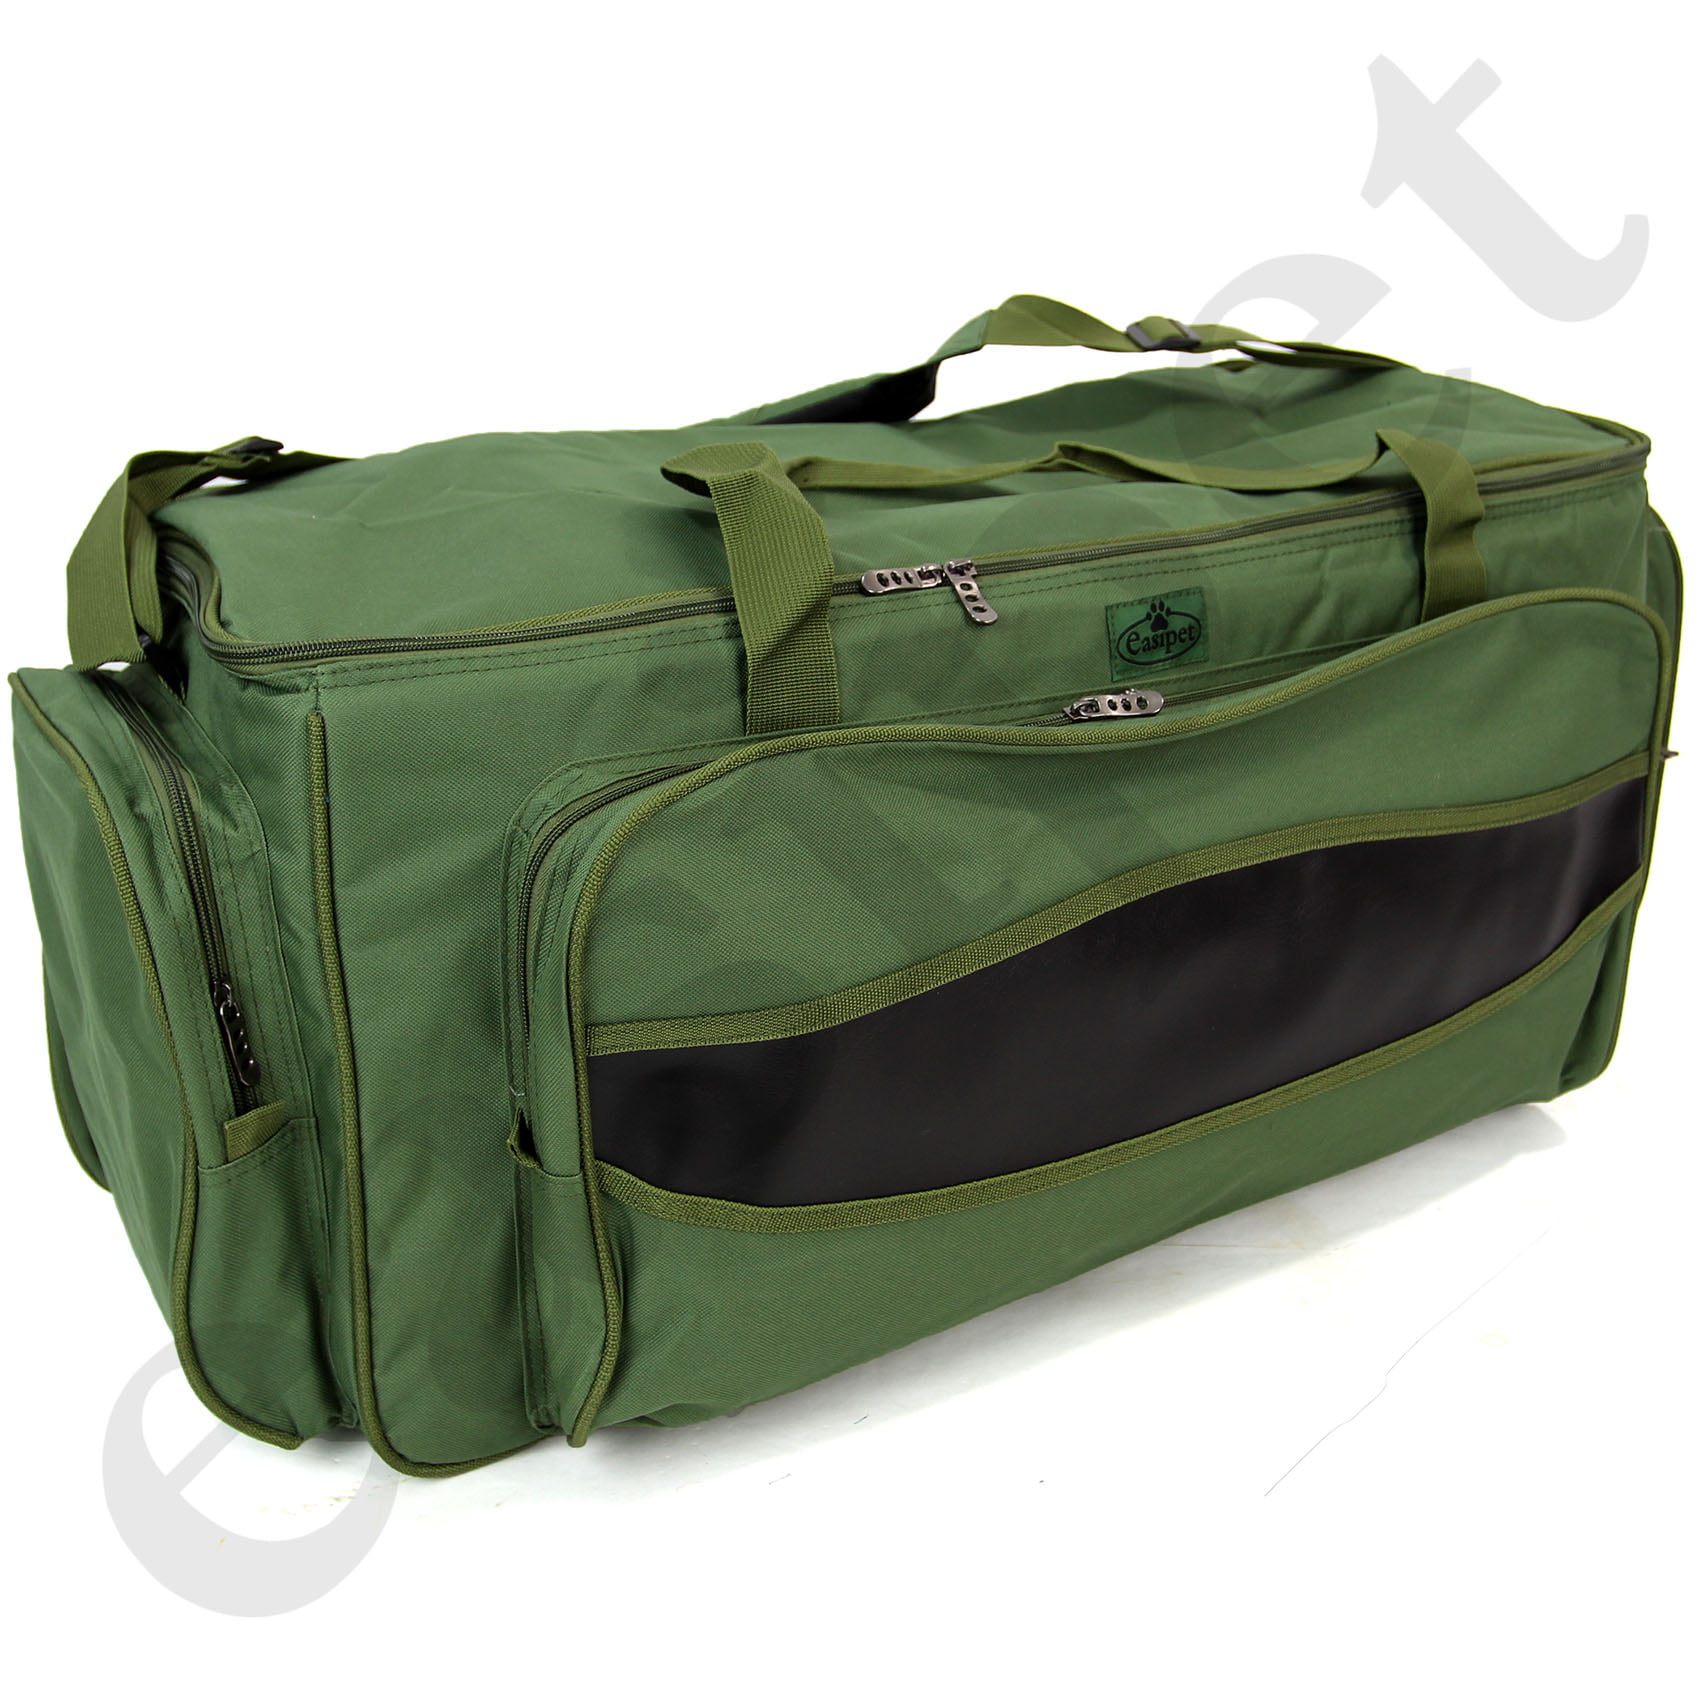 XXL Fishing Carryall/Tackle Bag Holdall Extra Large Carp Fishing.Faulty £12.99 